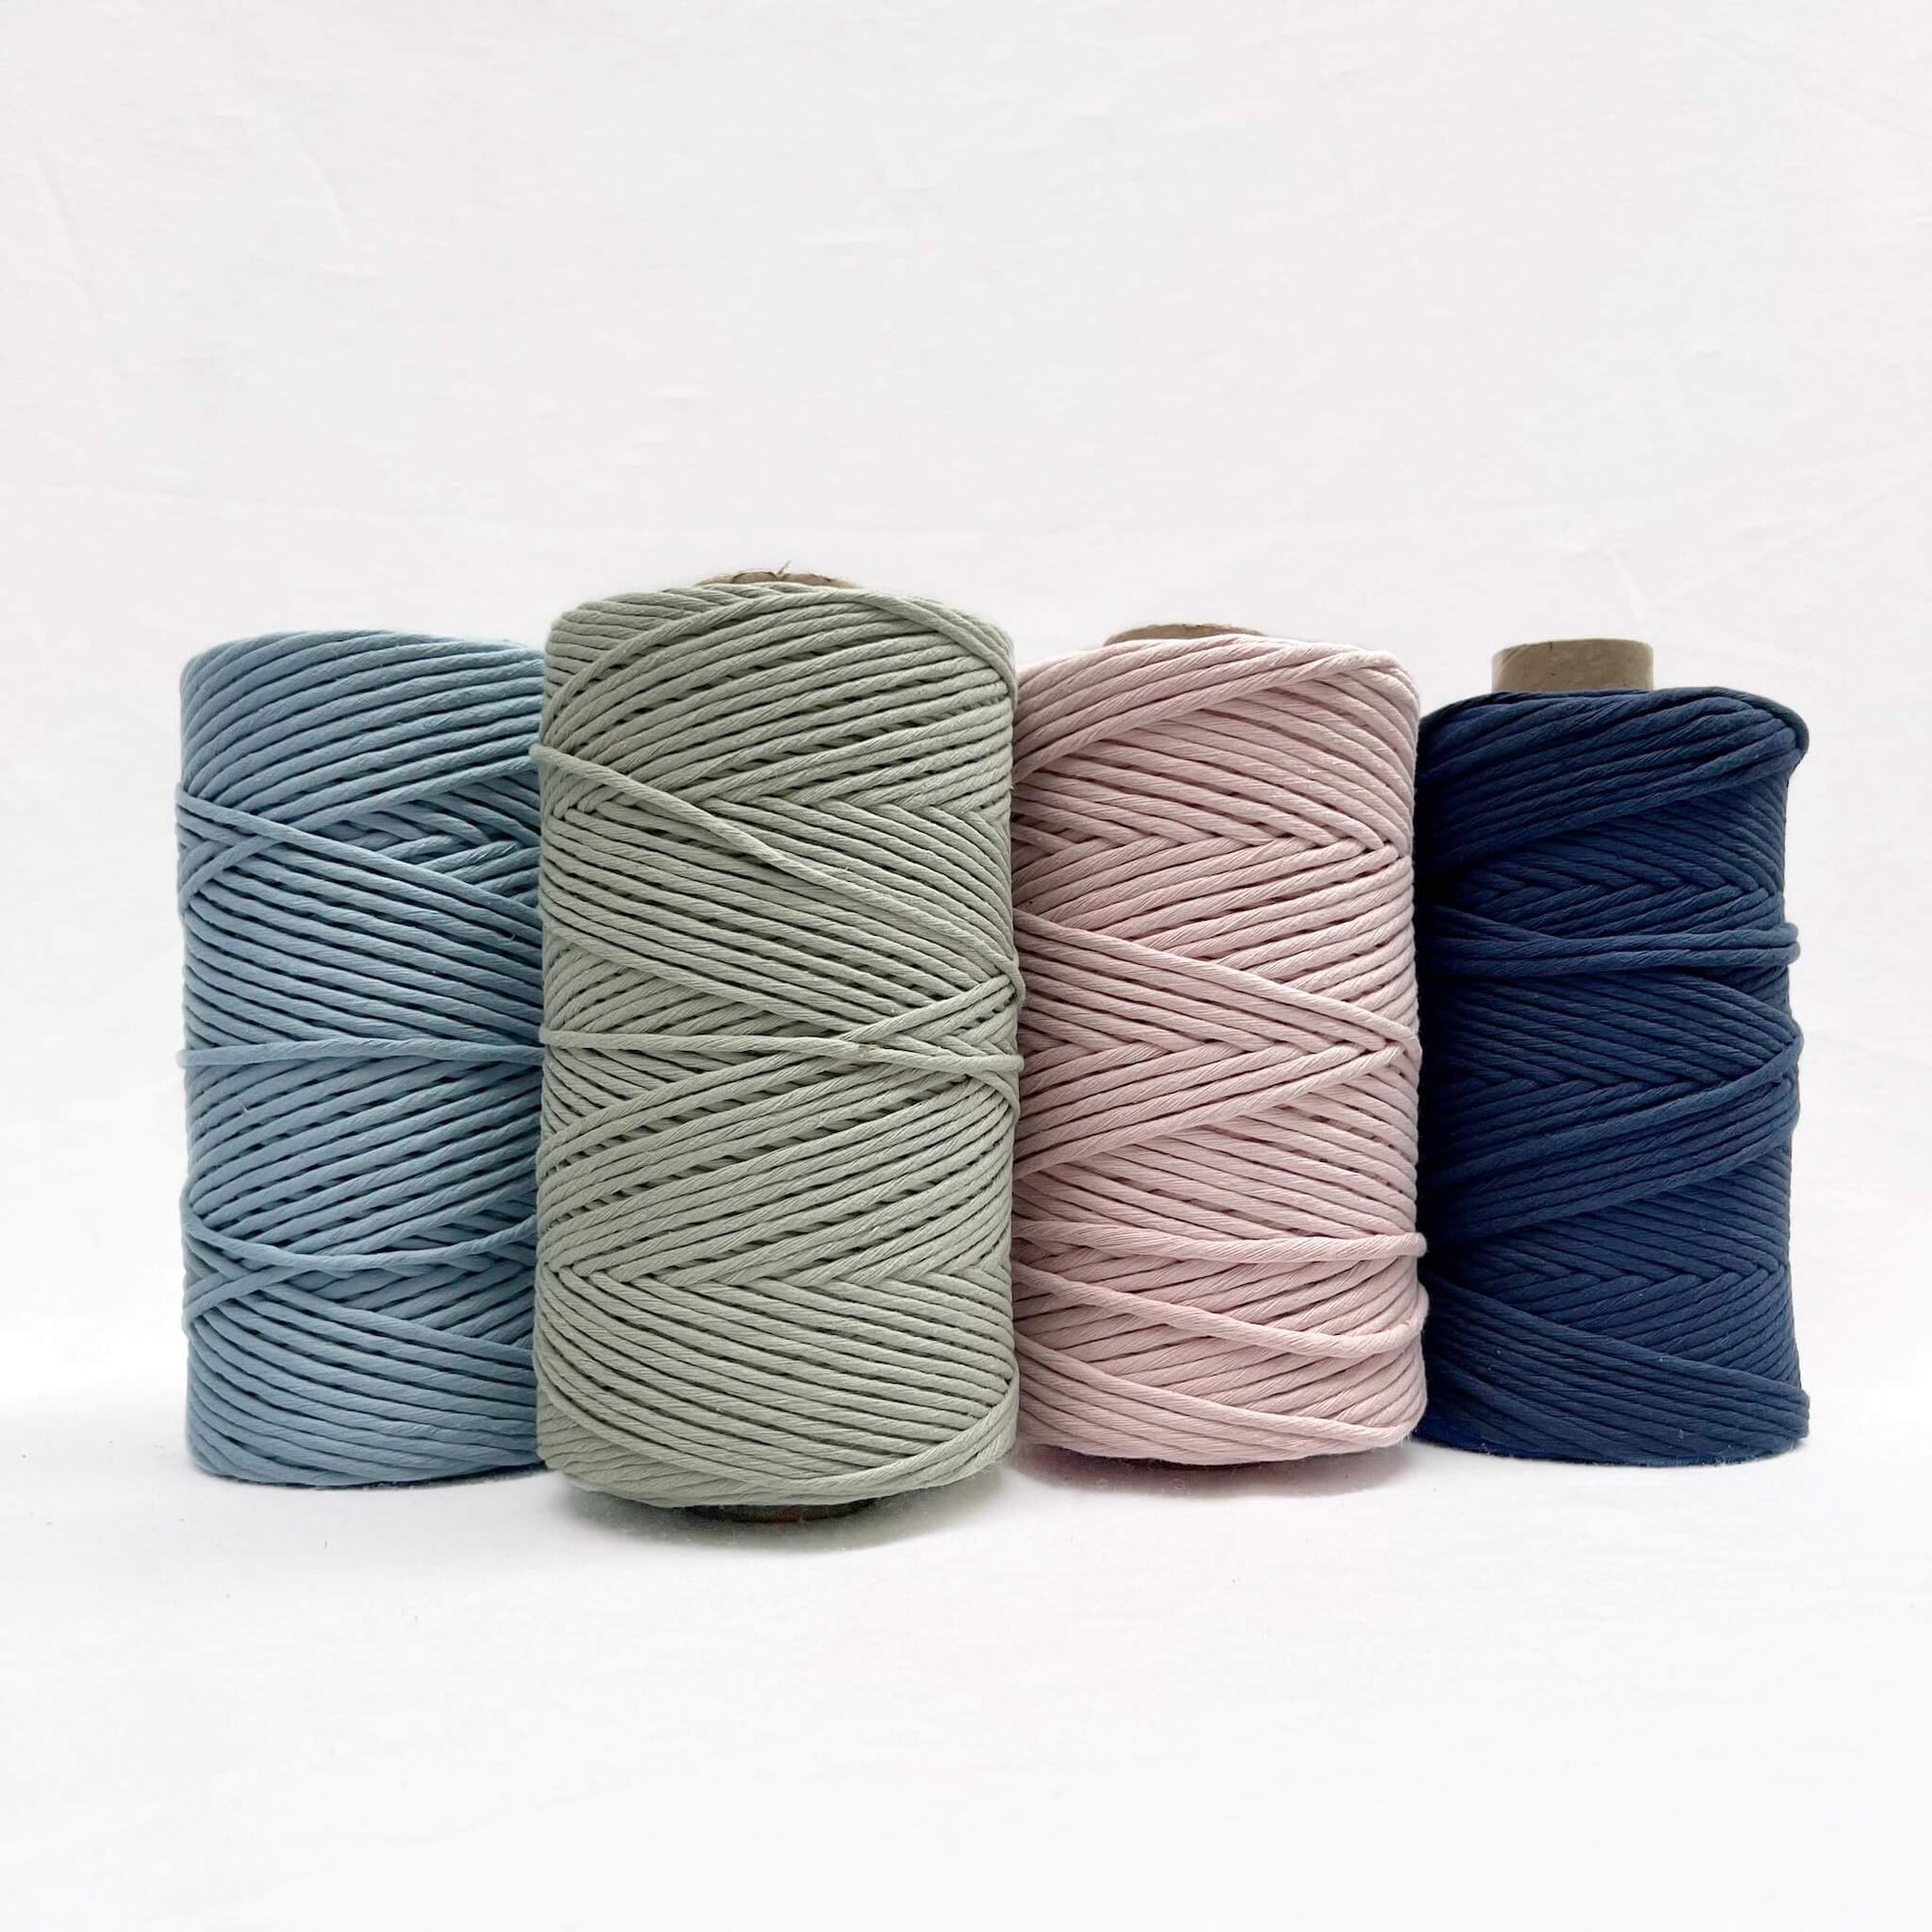 powder baby blue sage green light pink navy blue cotton cord for macrame in group photo four rolls standing up on white background